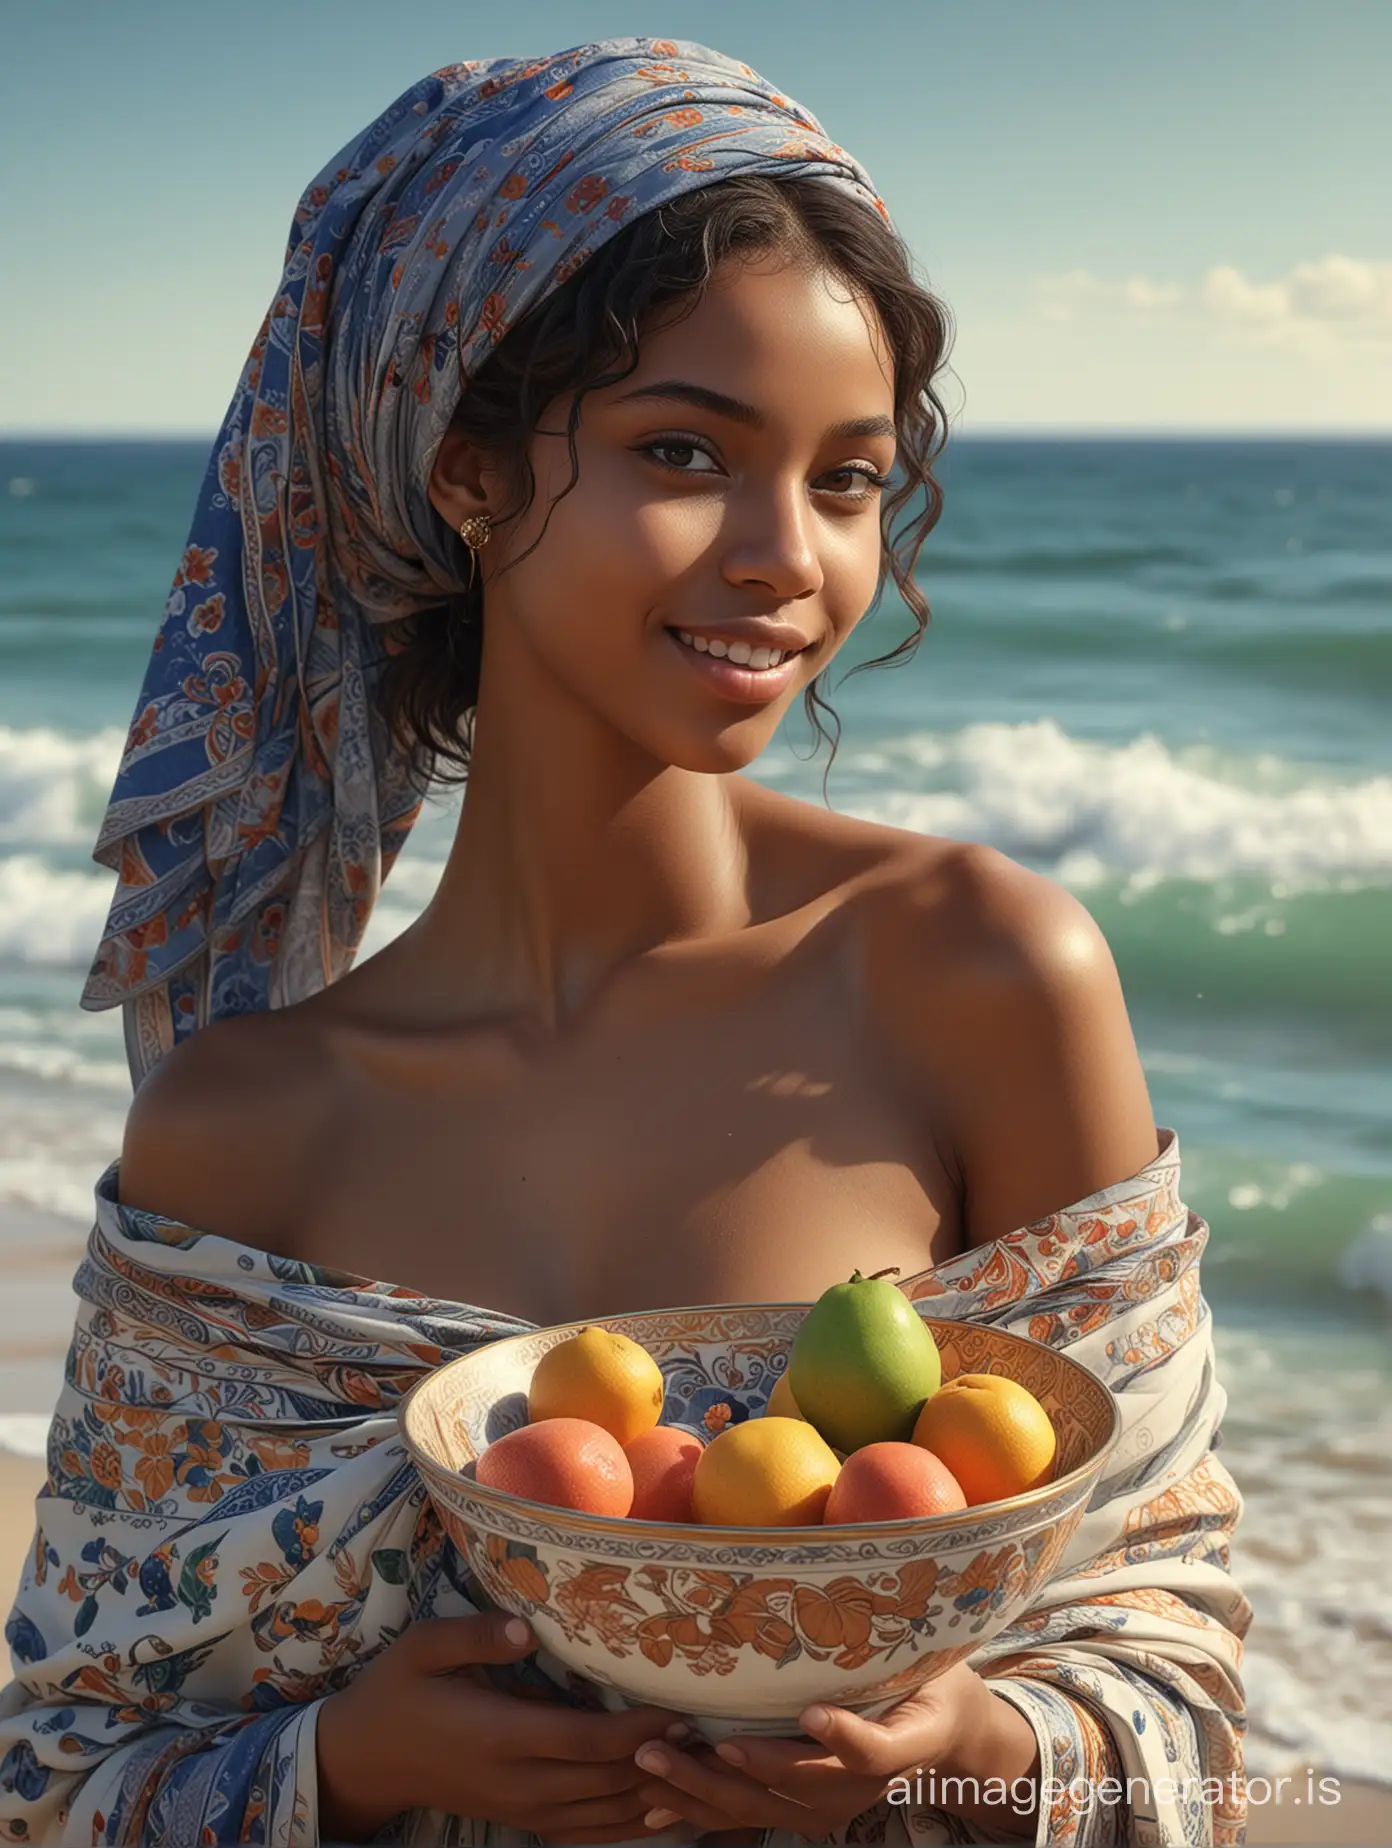 18 Year Teen Firm Boobs - Sensual Senegalese Beauty Nude Maiden Adorned with Exotic Fruits on a  Pristine Beach | AI Image Generator